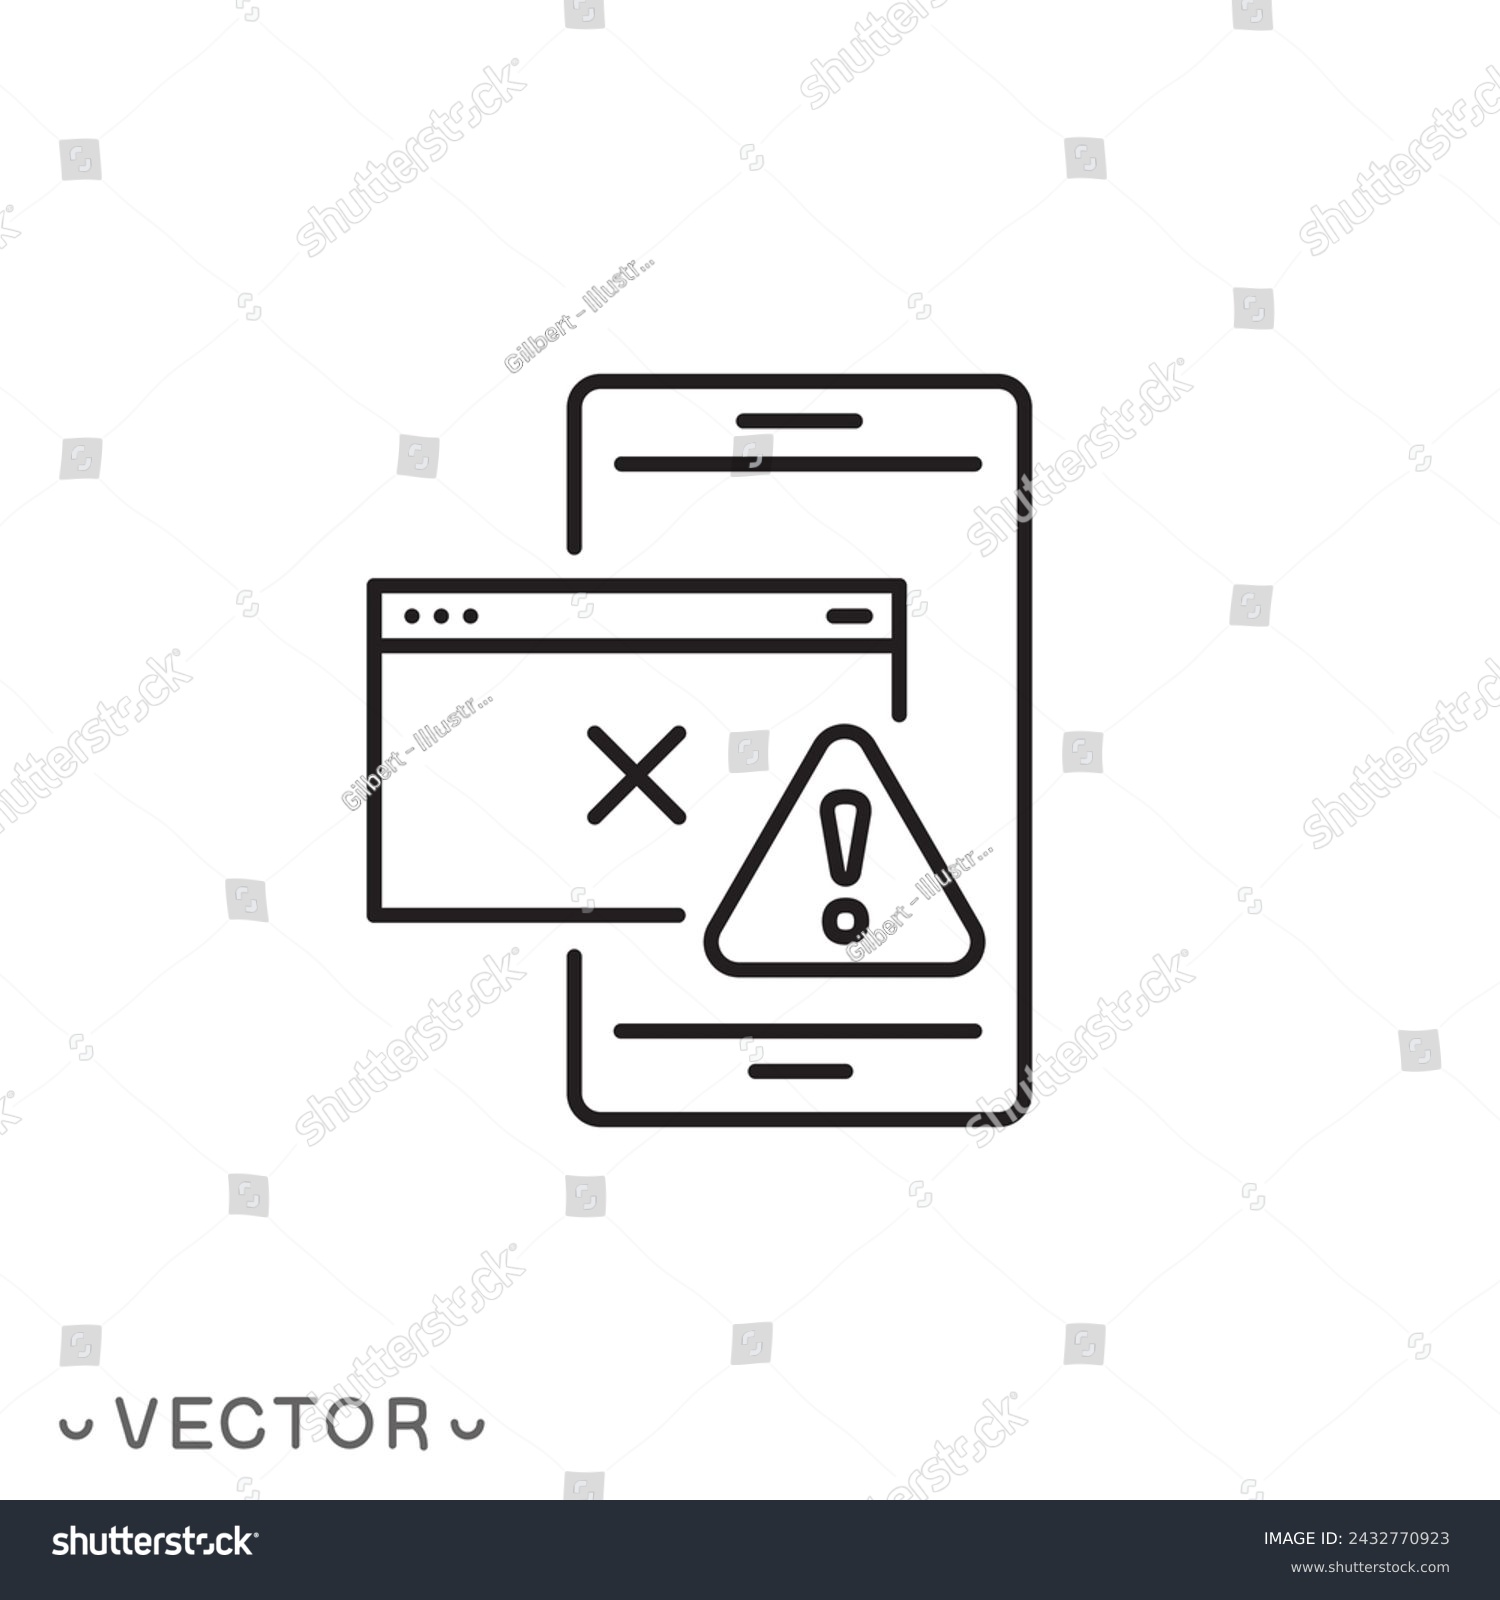 SVG of uncensored content icon, obscene site page warning, inappropriate censored content, thin line symbol isolated on white background, editable stroke eps 10 vector illustration svg